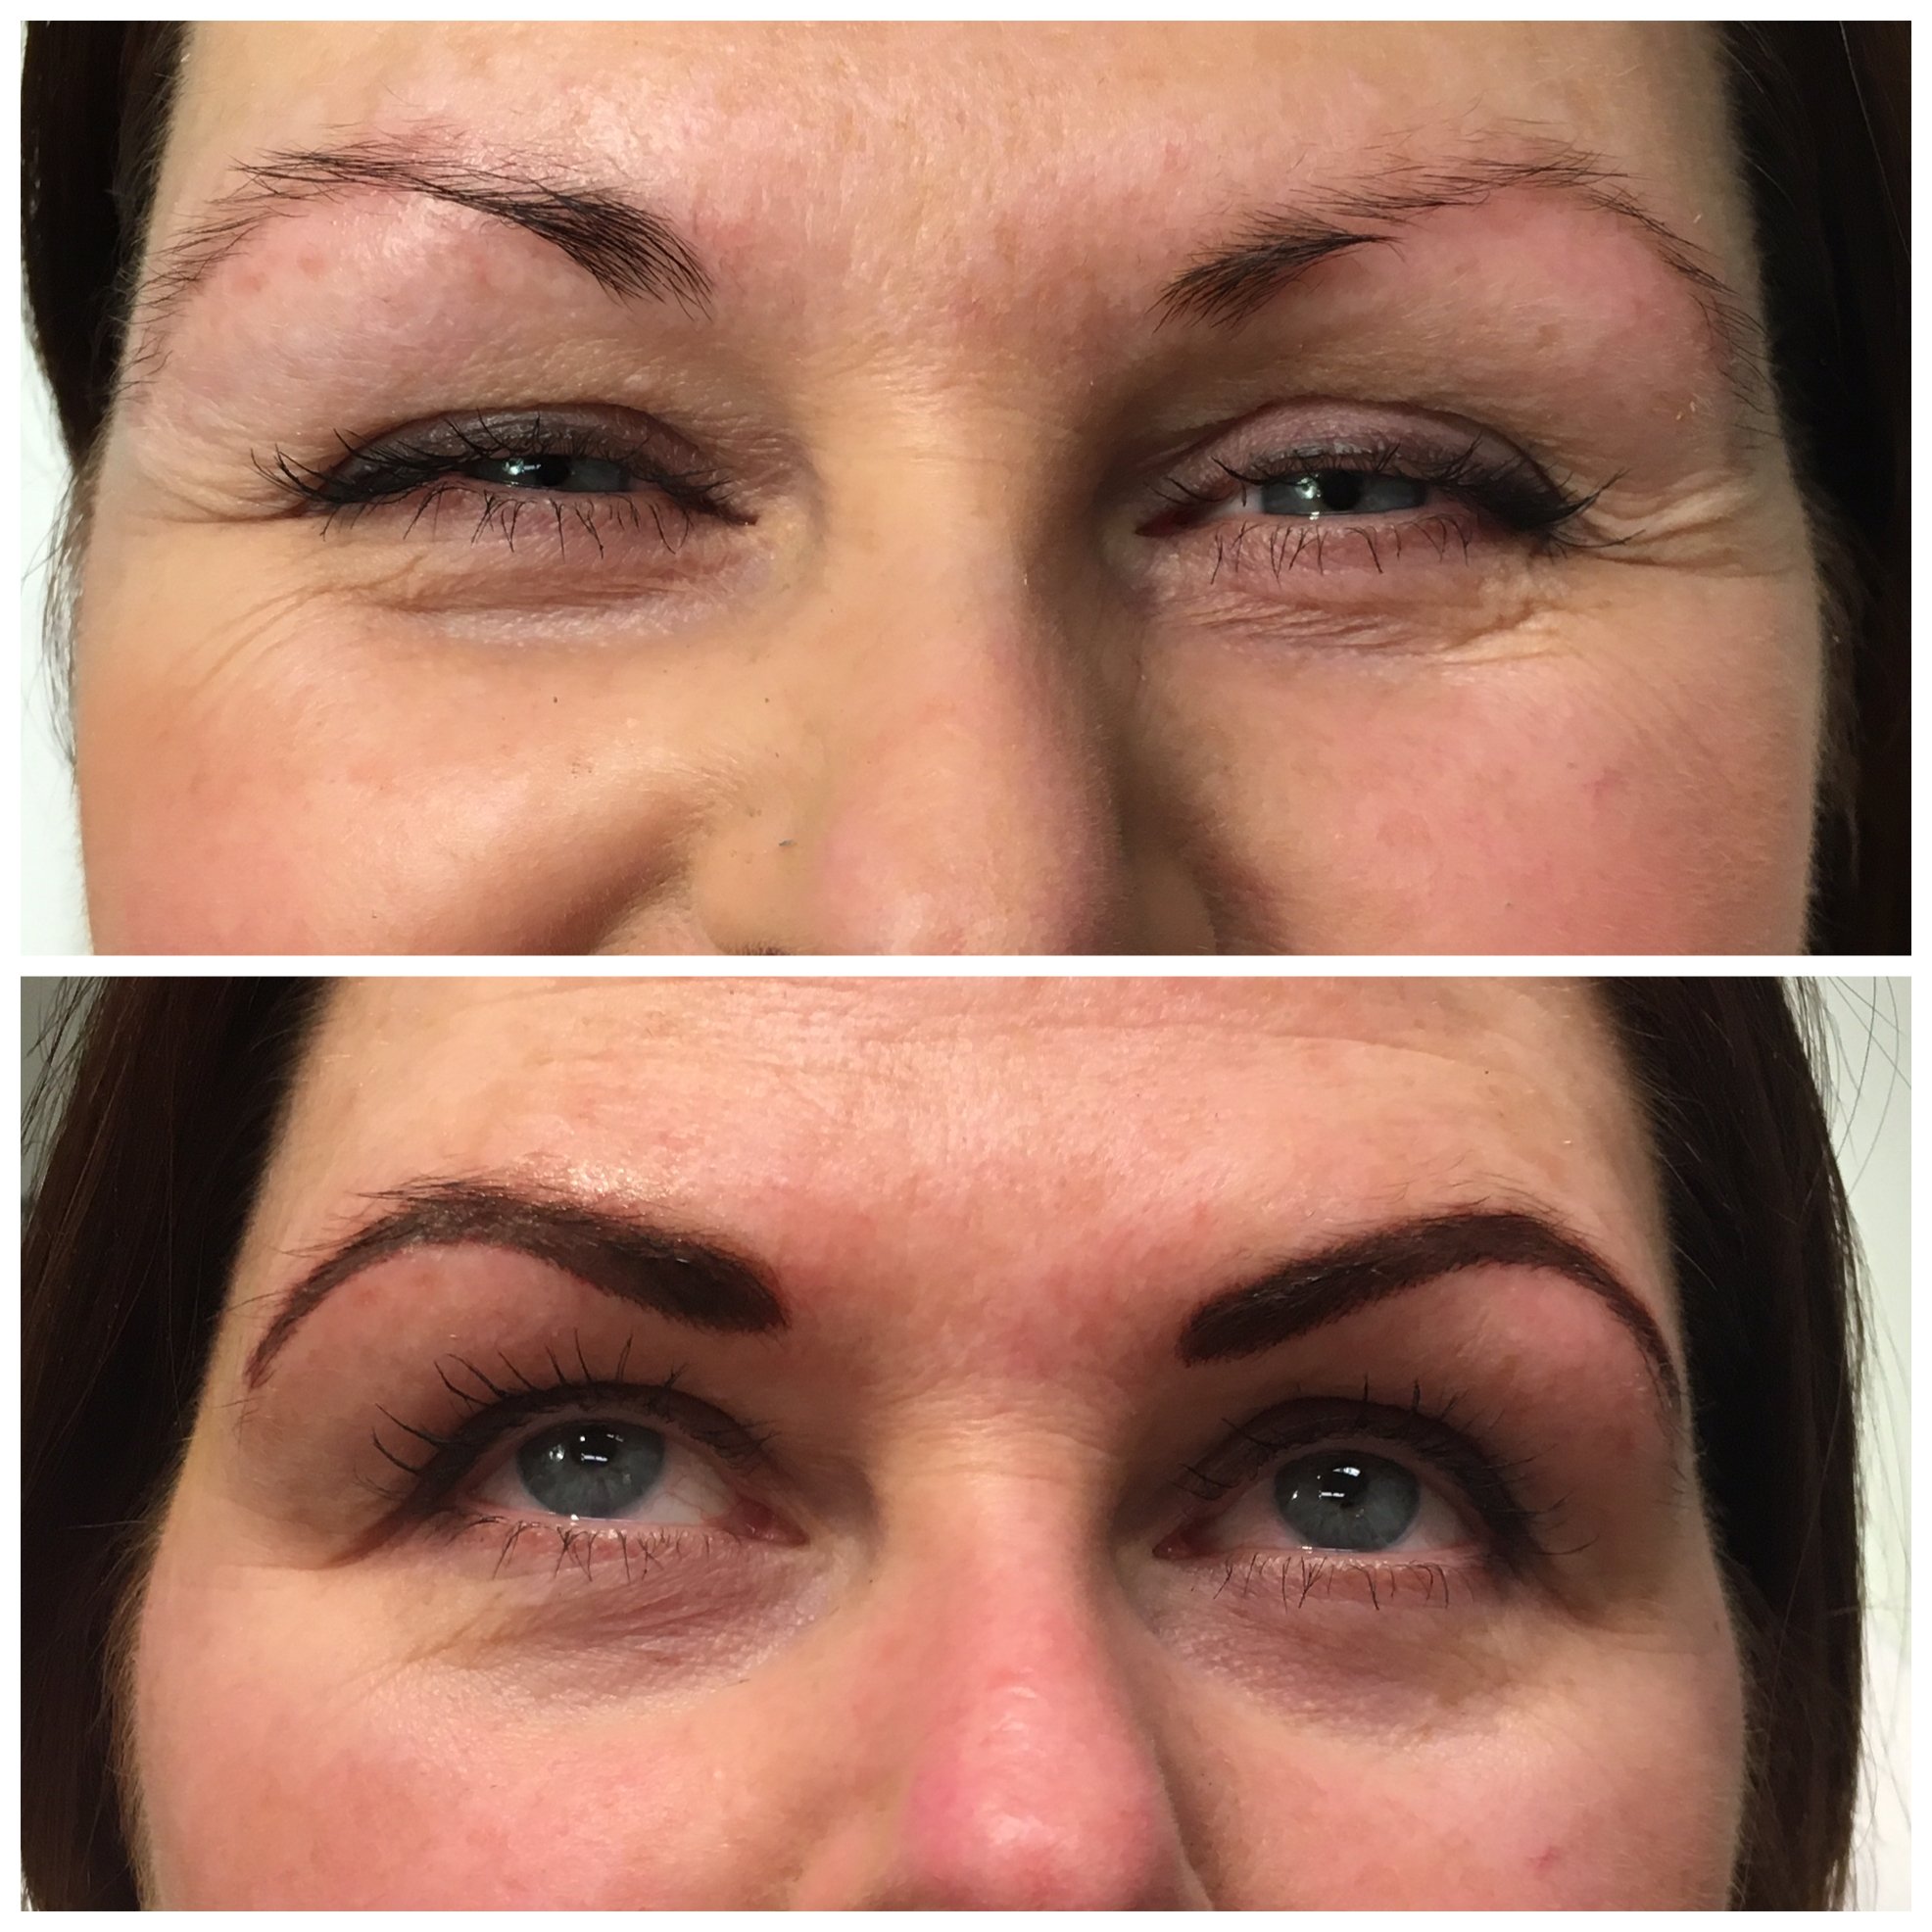 Before and after top and bottom comparison of woman's eyebrow treatment